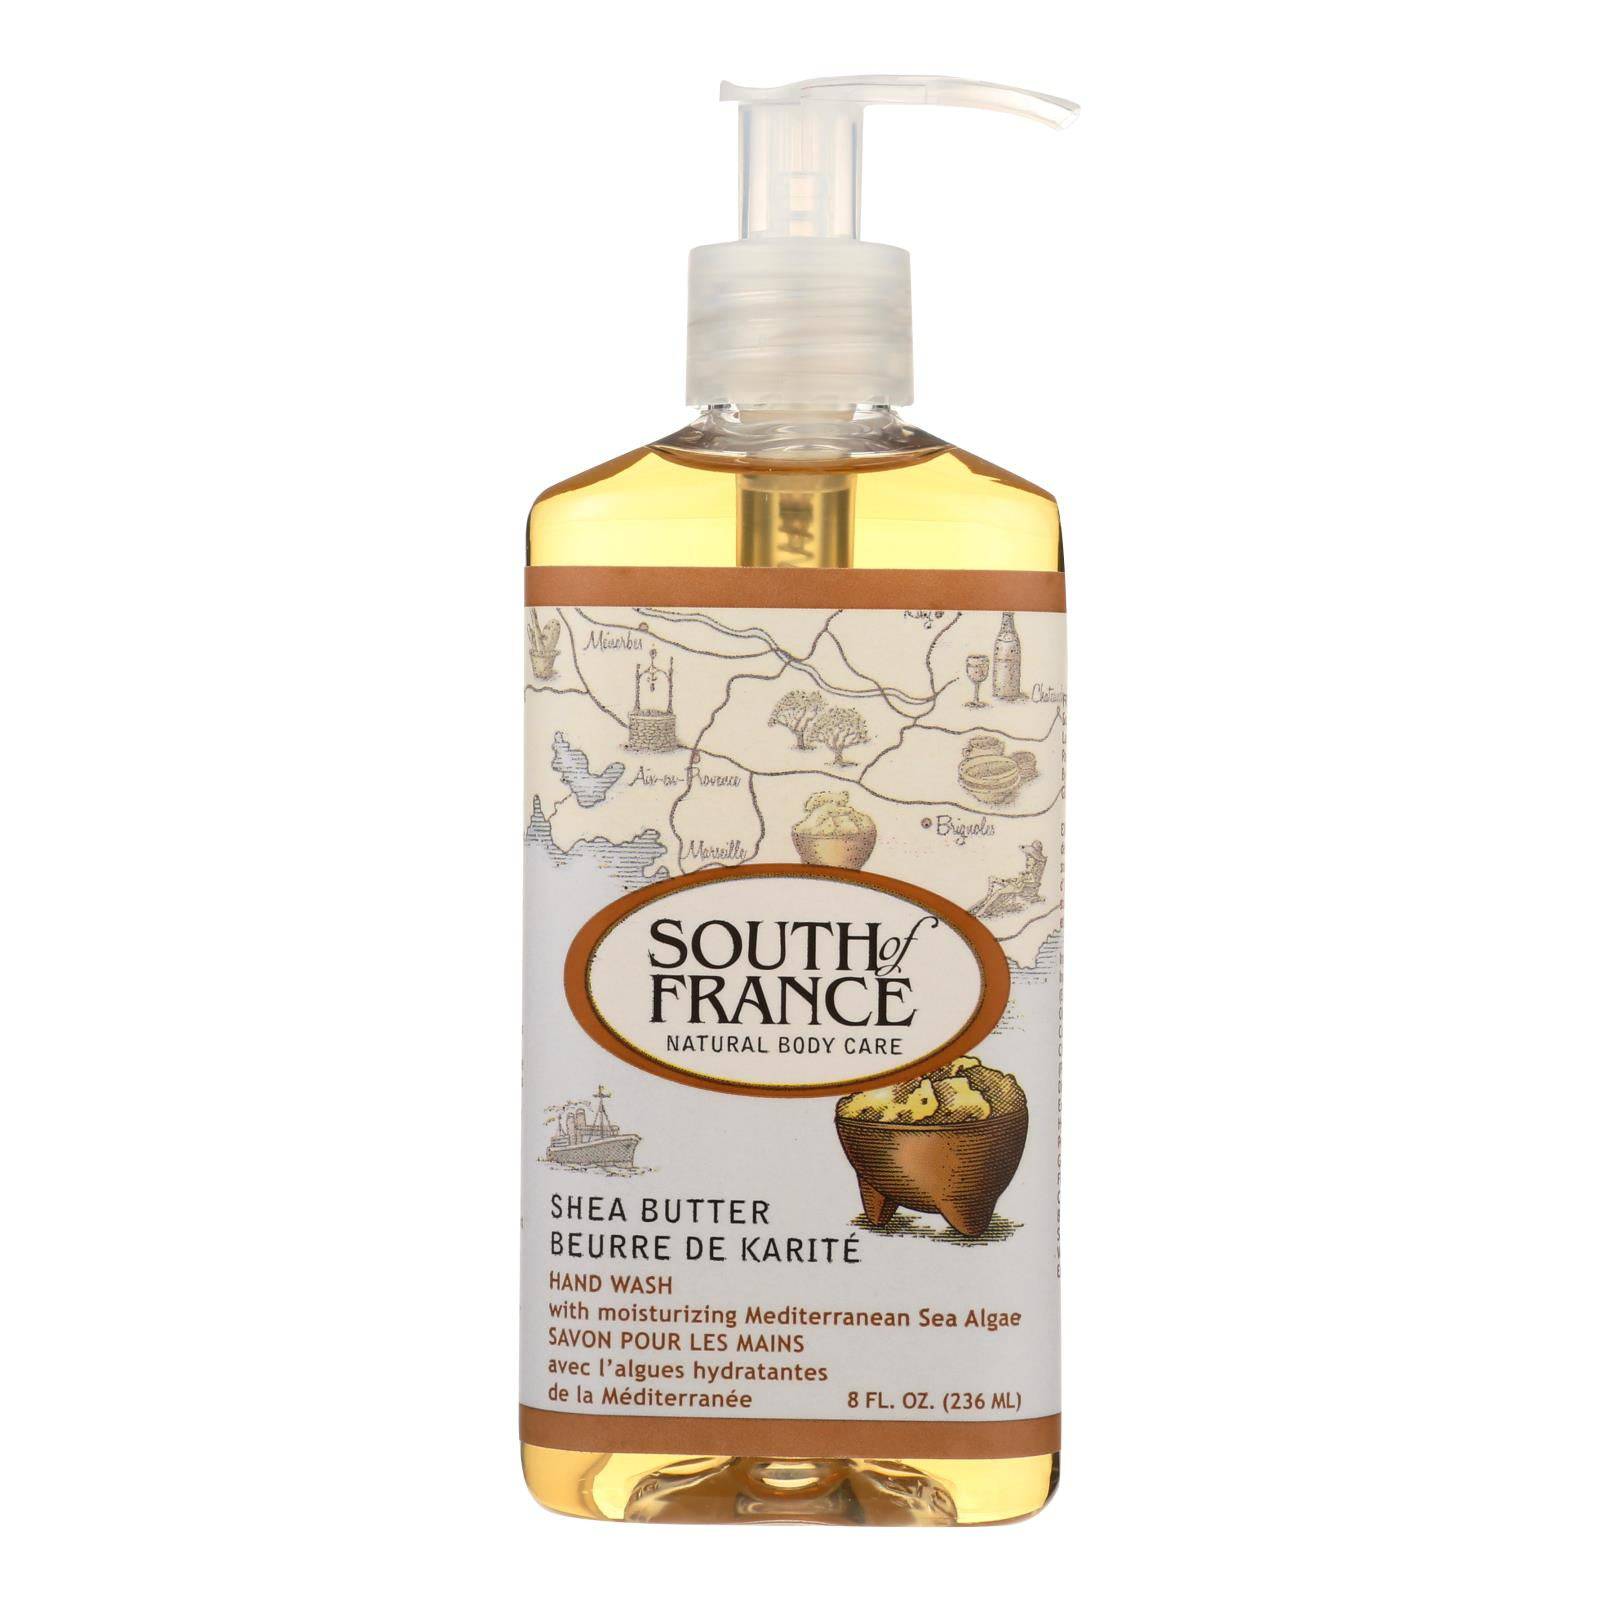 Buy South Of France Hand Wash - Shea Butter - 8 Oz  at OnlyNaturals.us